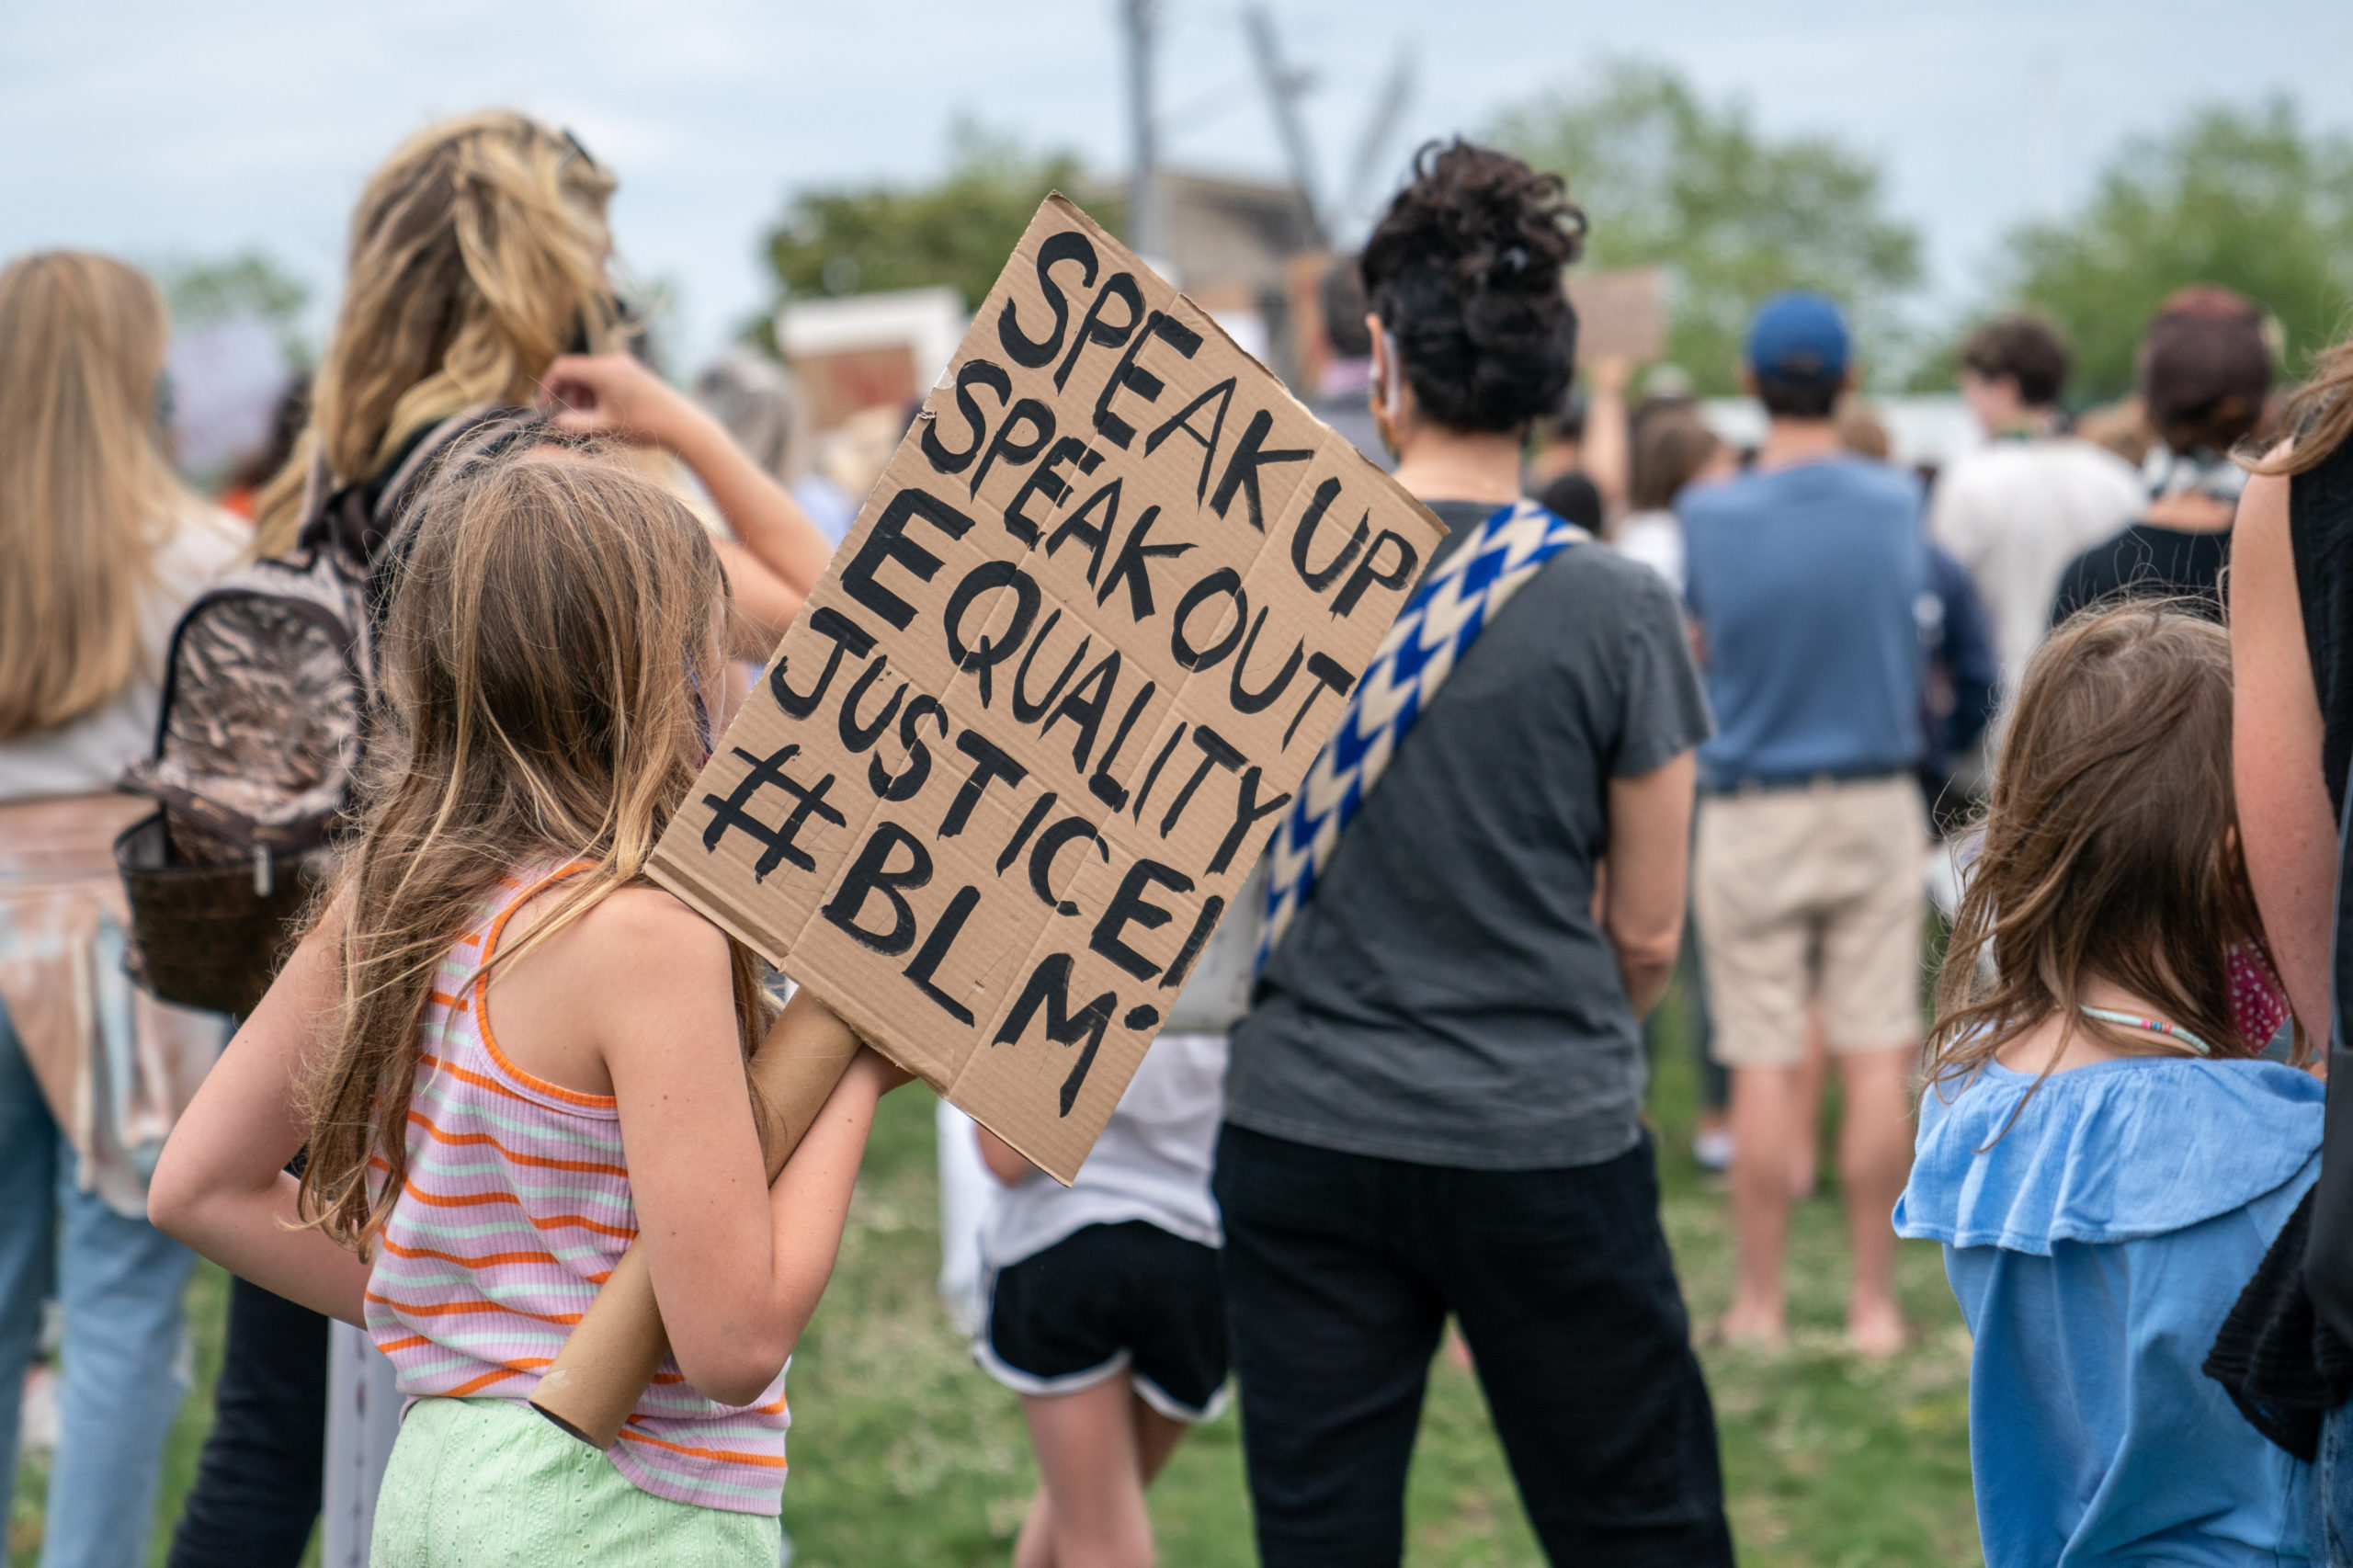 Hundreds of people participated in a protest on Friday in Sag Harbor against police brutality and racism.